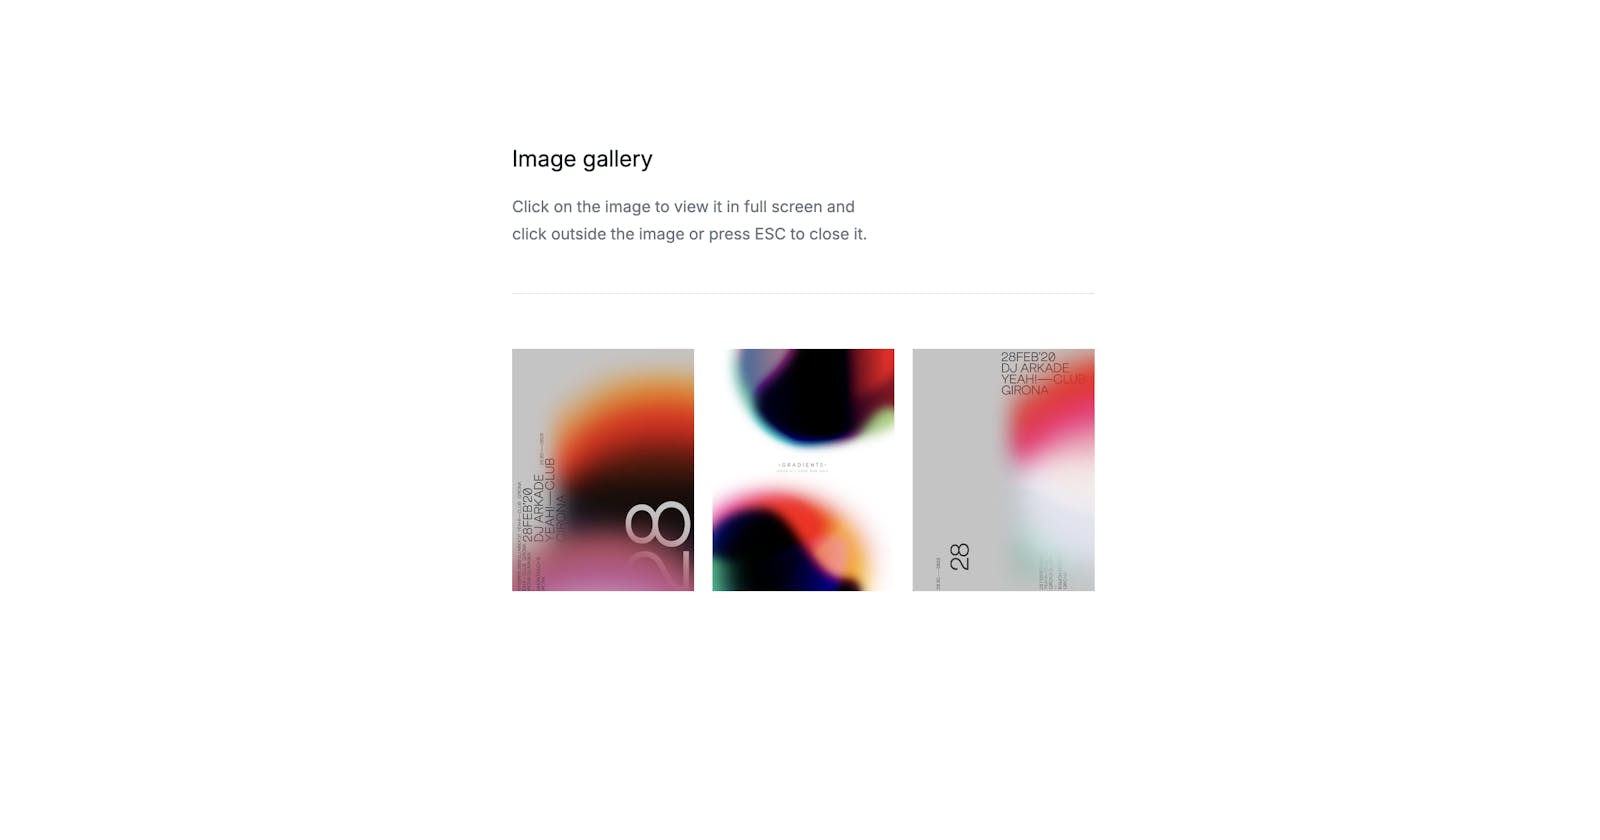 How to create a image gallery with Tailwind CSS and Alpinejs